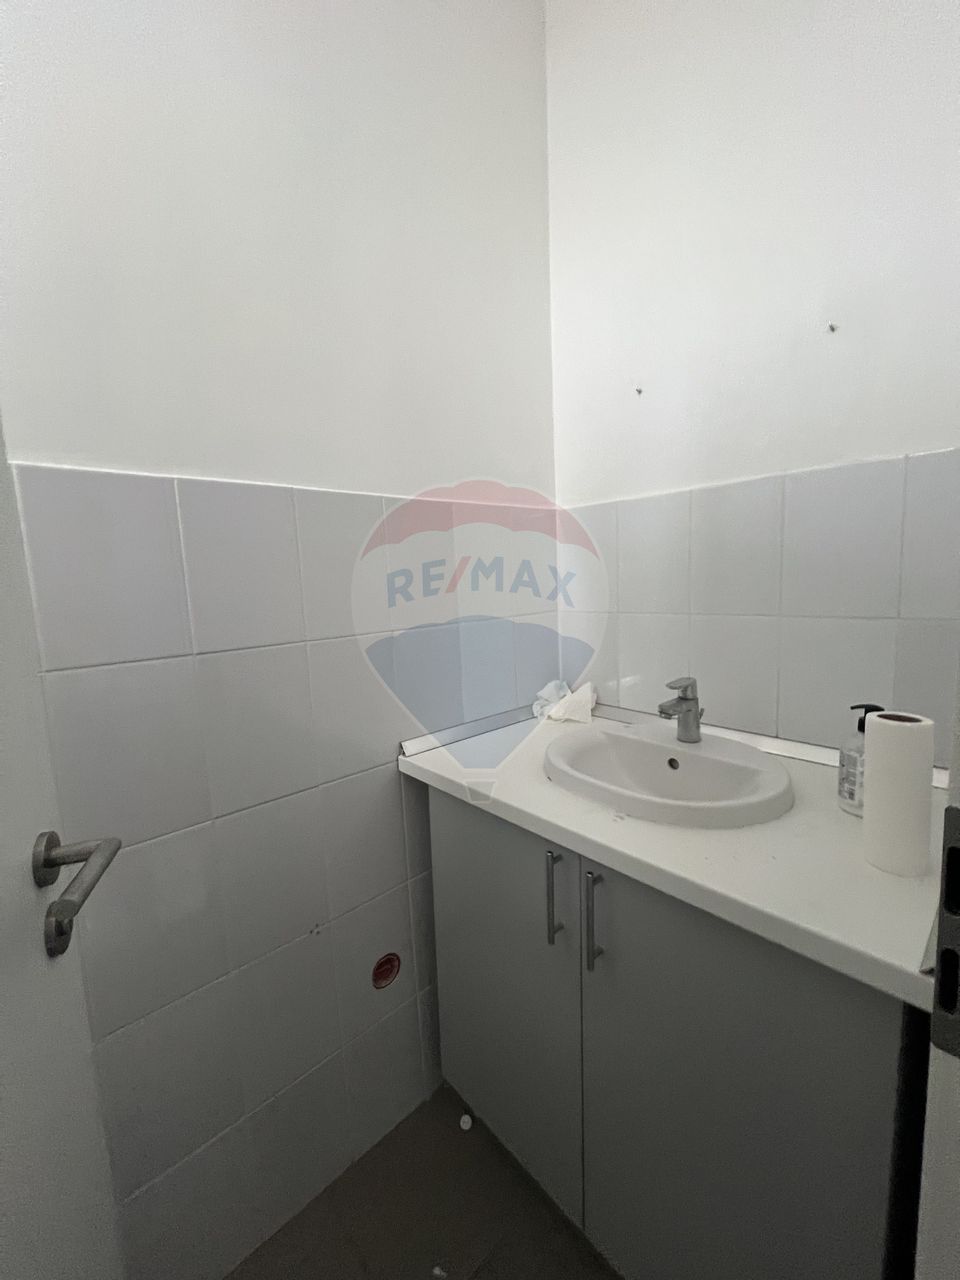 69.18sq.m Commercial Space for rent, Tomis III area